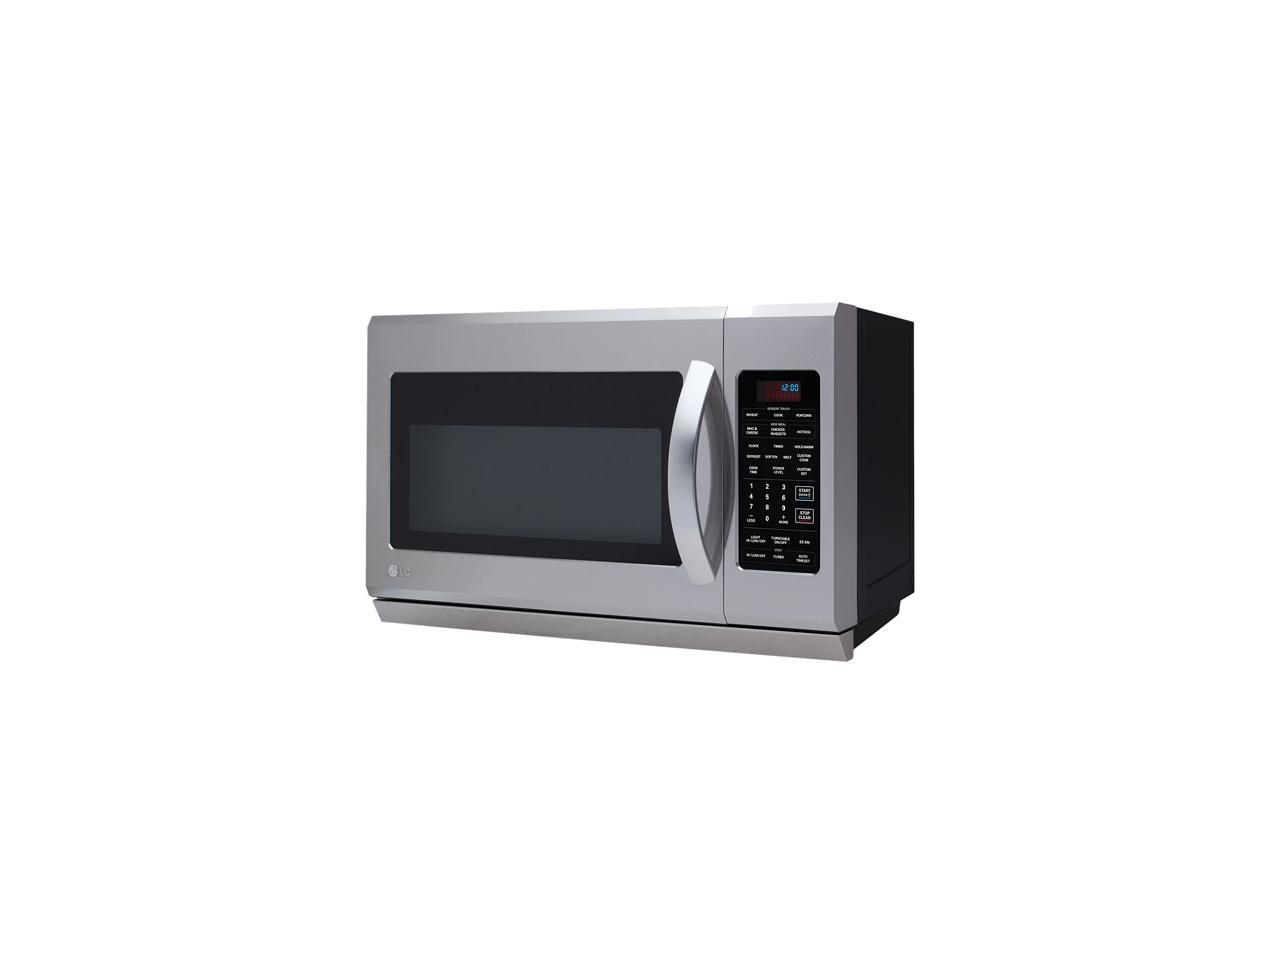 LG 2.0 cu. ft. Over-The-Range Microwave Oven with Extenda Vent